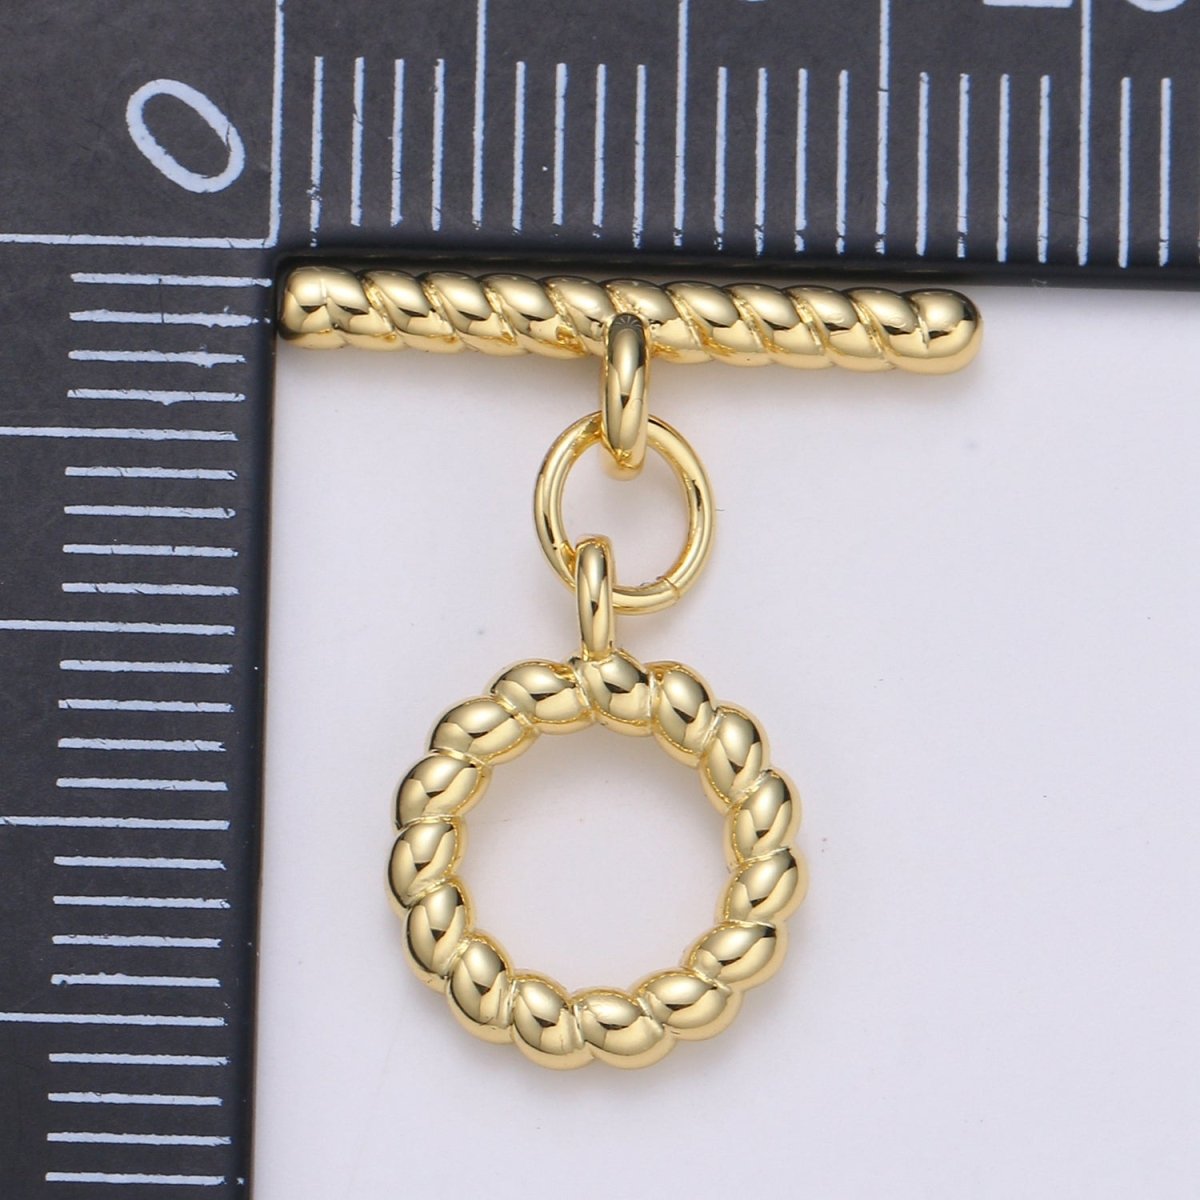 10.6 mm 24K Gold twisted pretzel Toggle Clasp with jump ring-Gold, for necklace, bracelet, DIY Jewelry making L-139 - DLUXCA